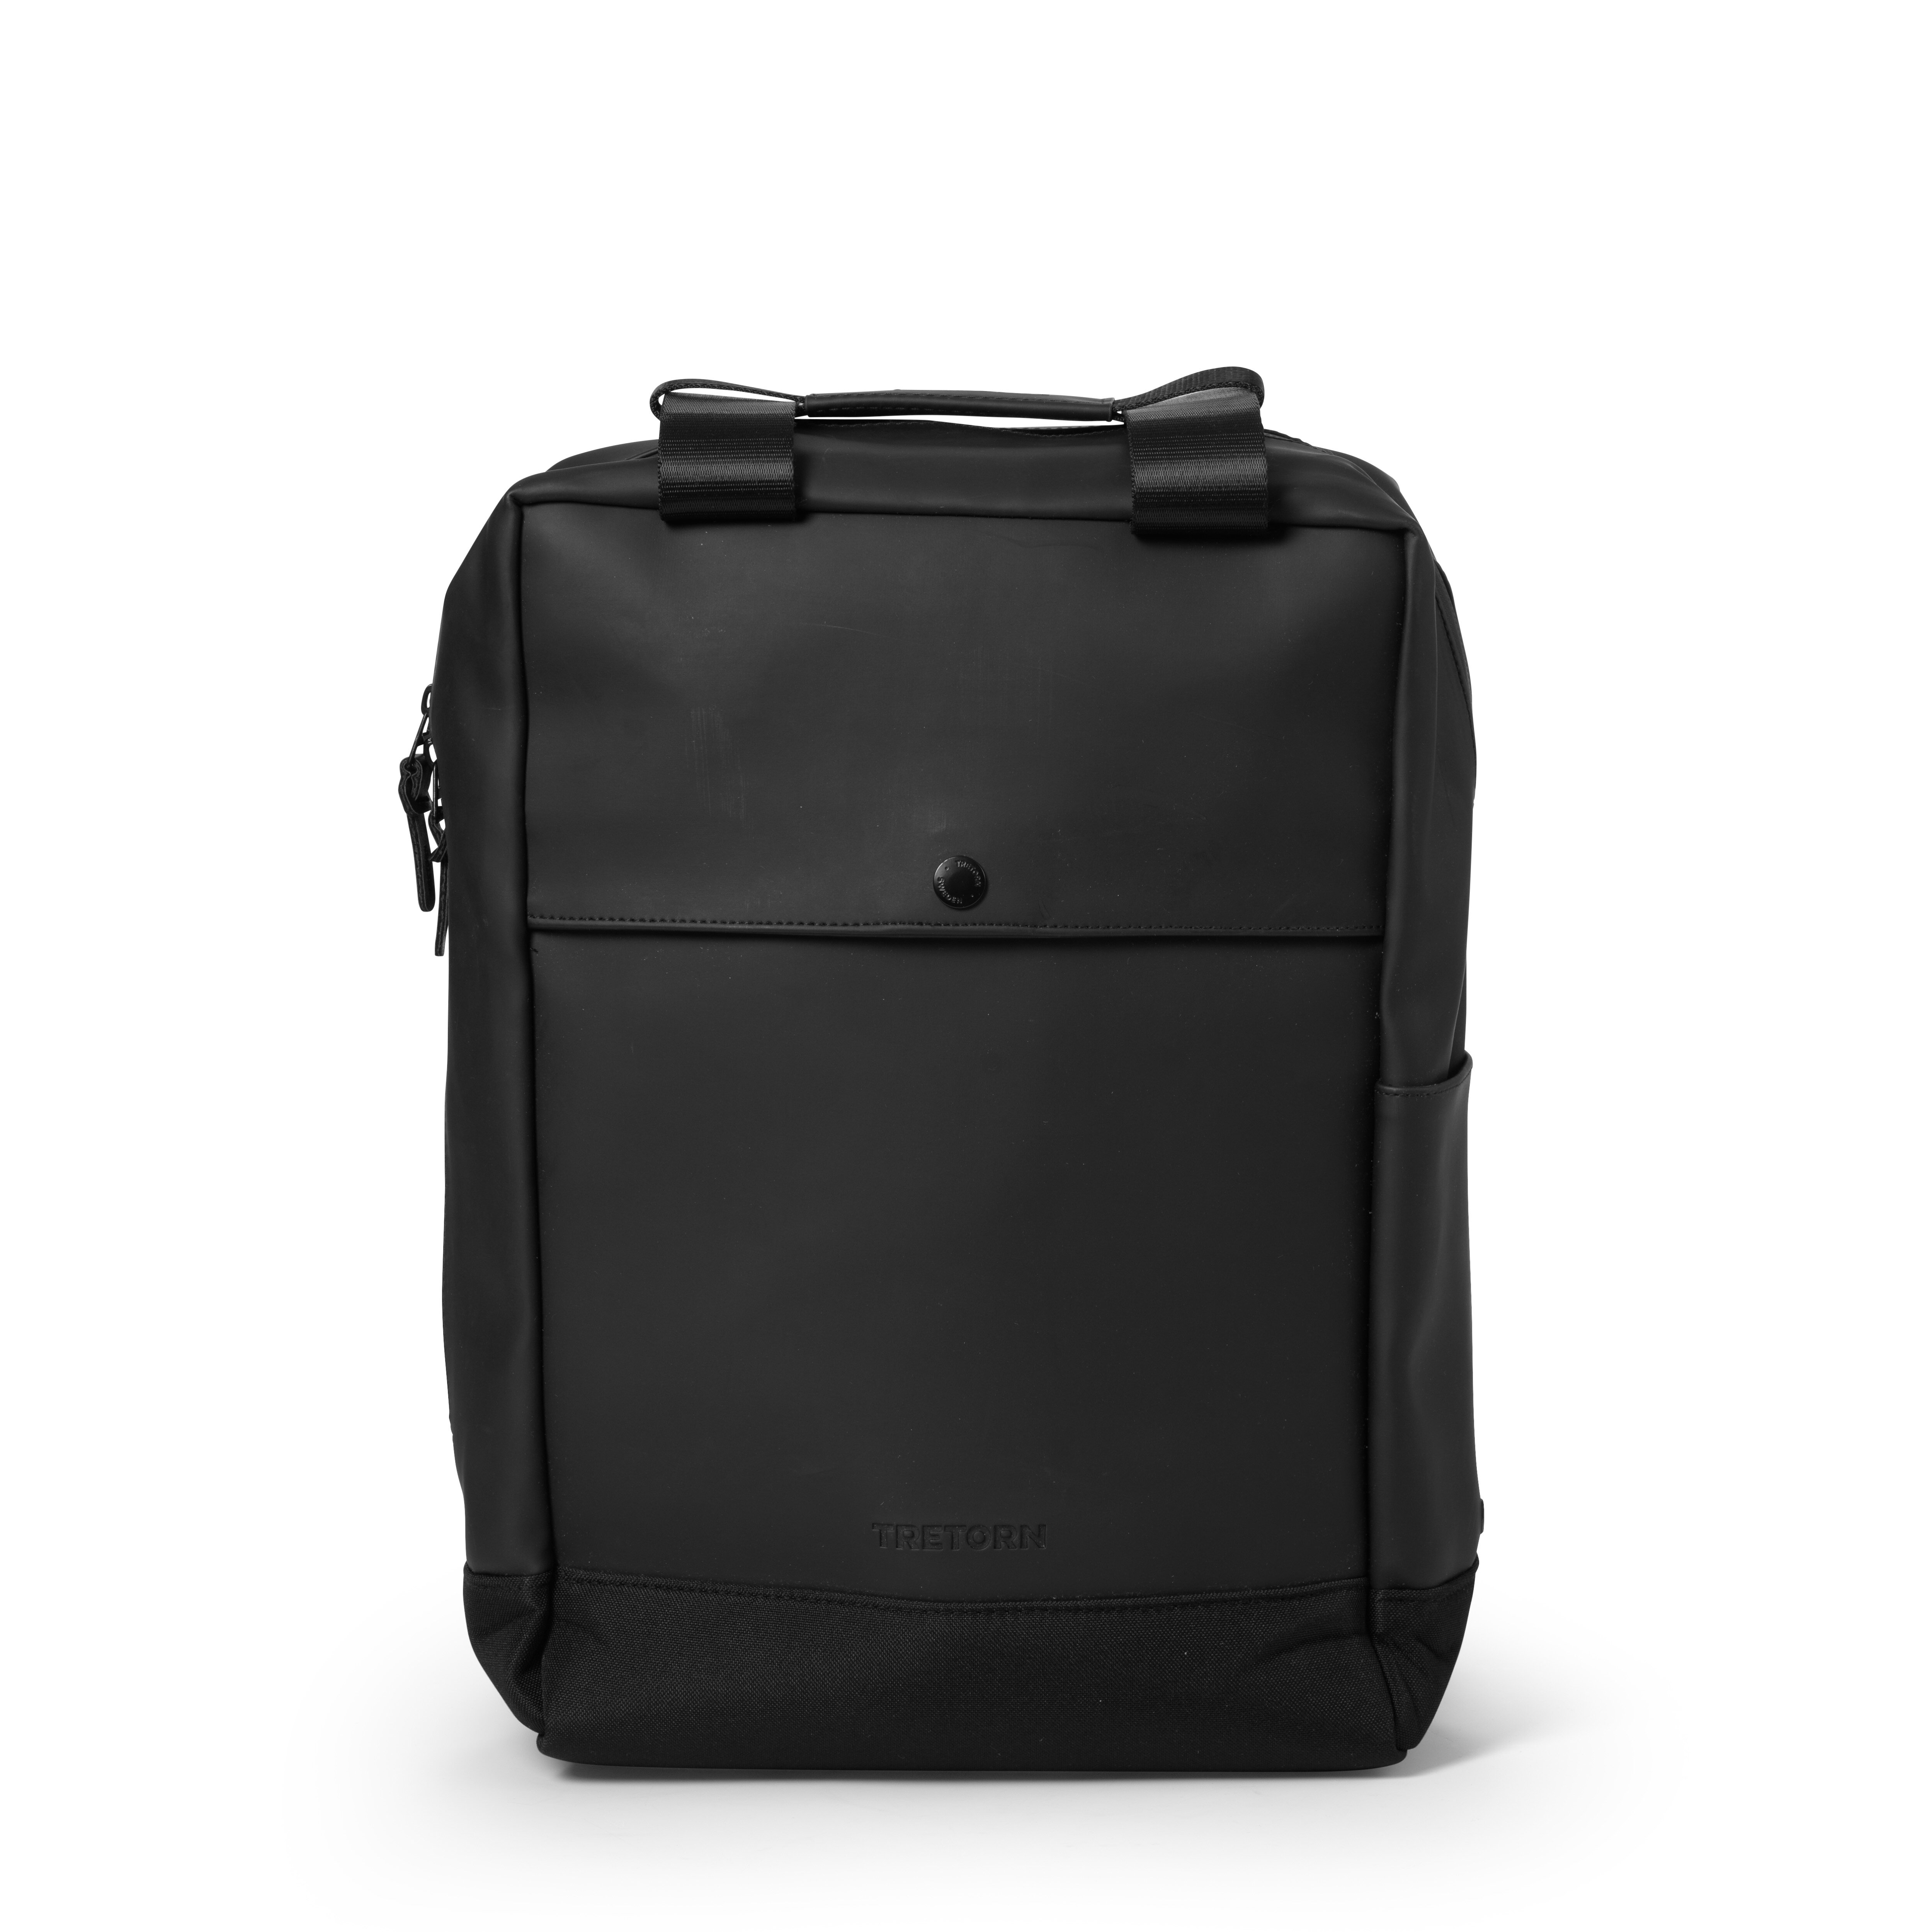 Wings Flexpack waterproof backpack from Tretorn in the colour black